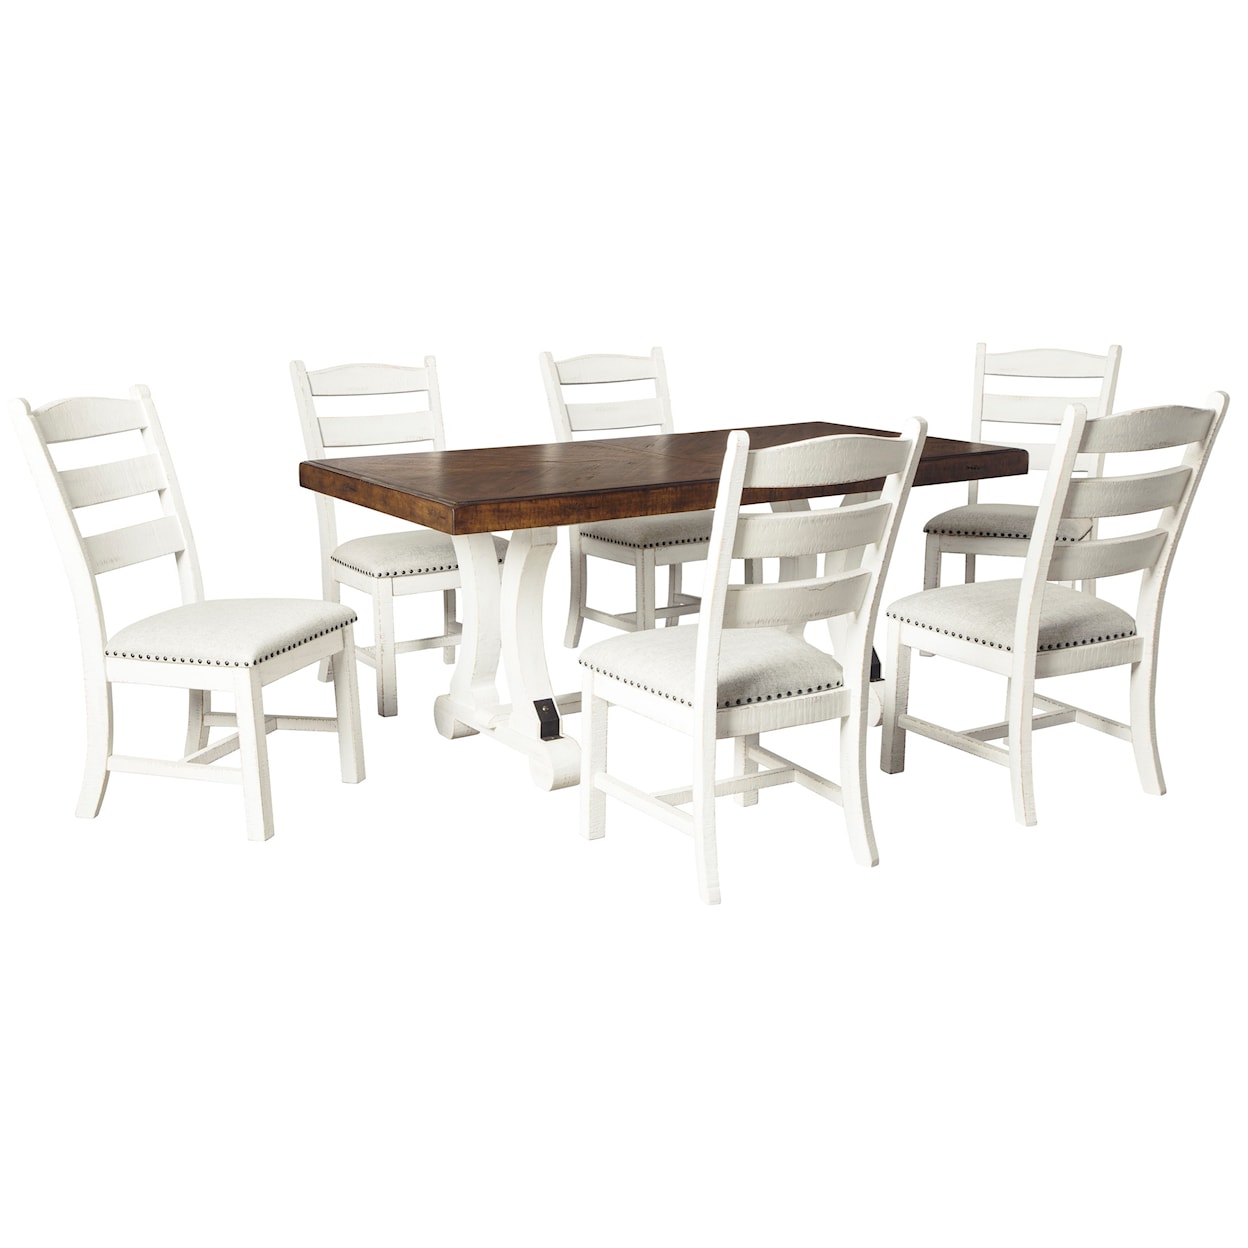 Signature Design by Ashley Furniture Valebeck 7-Piece Table and Chair Set